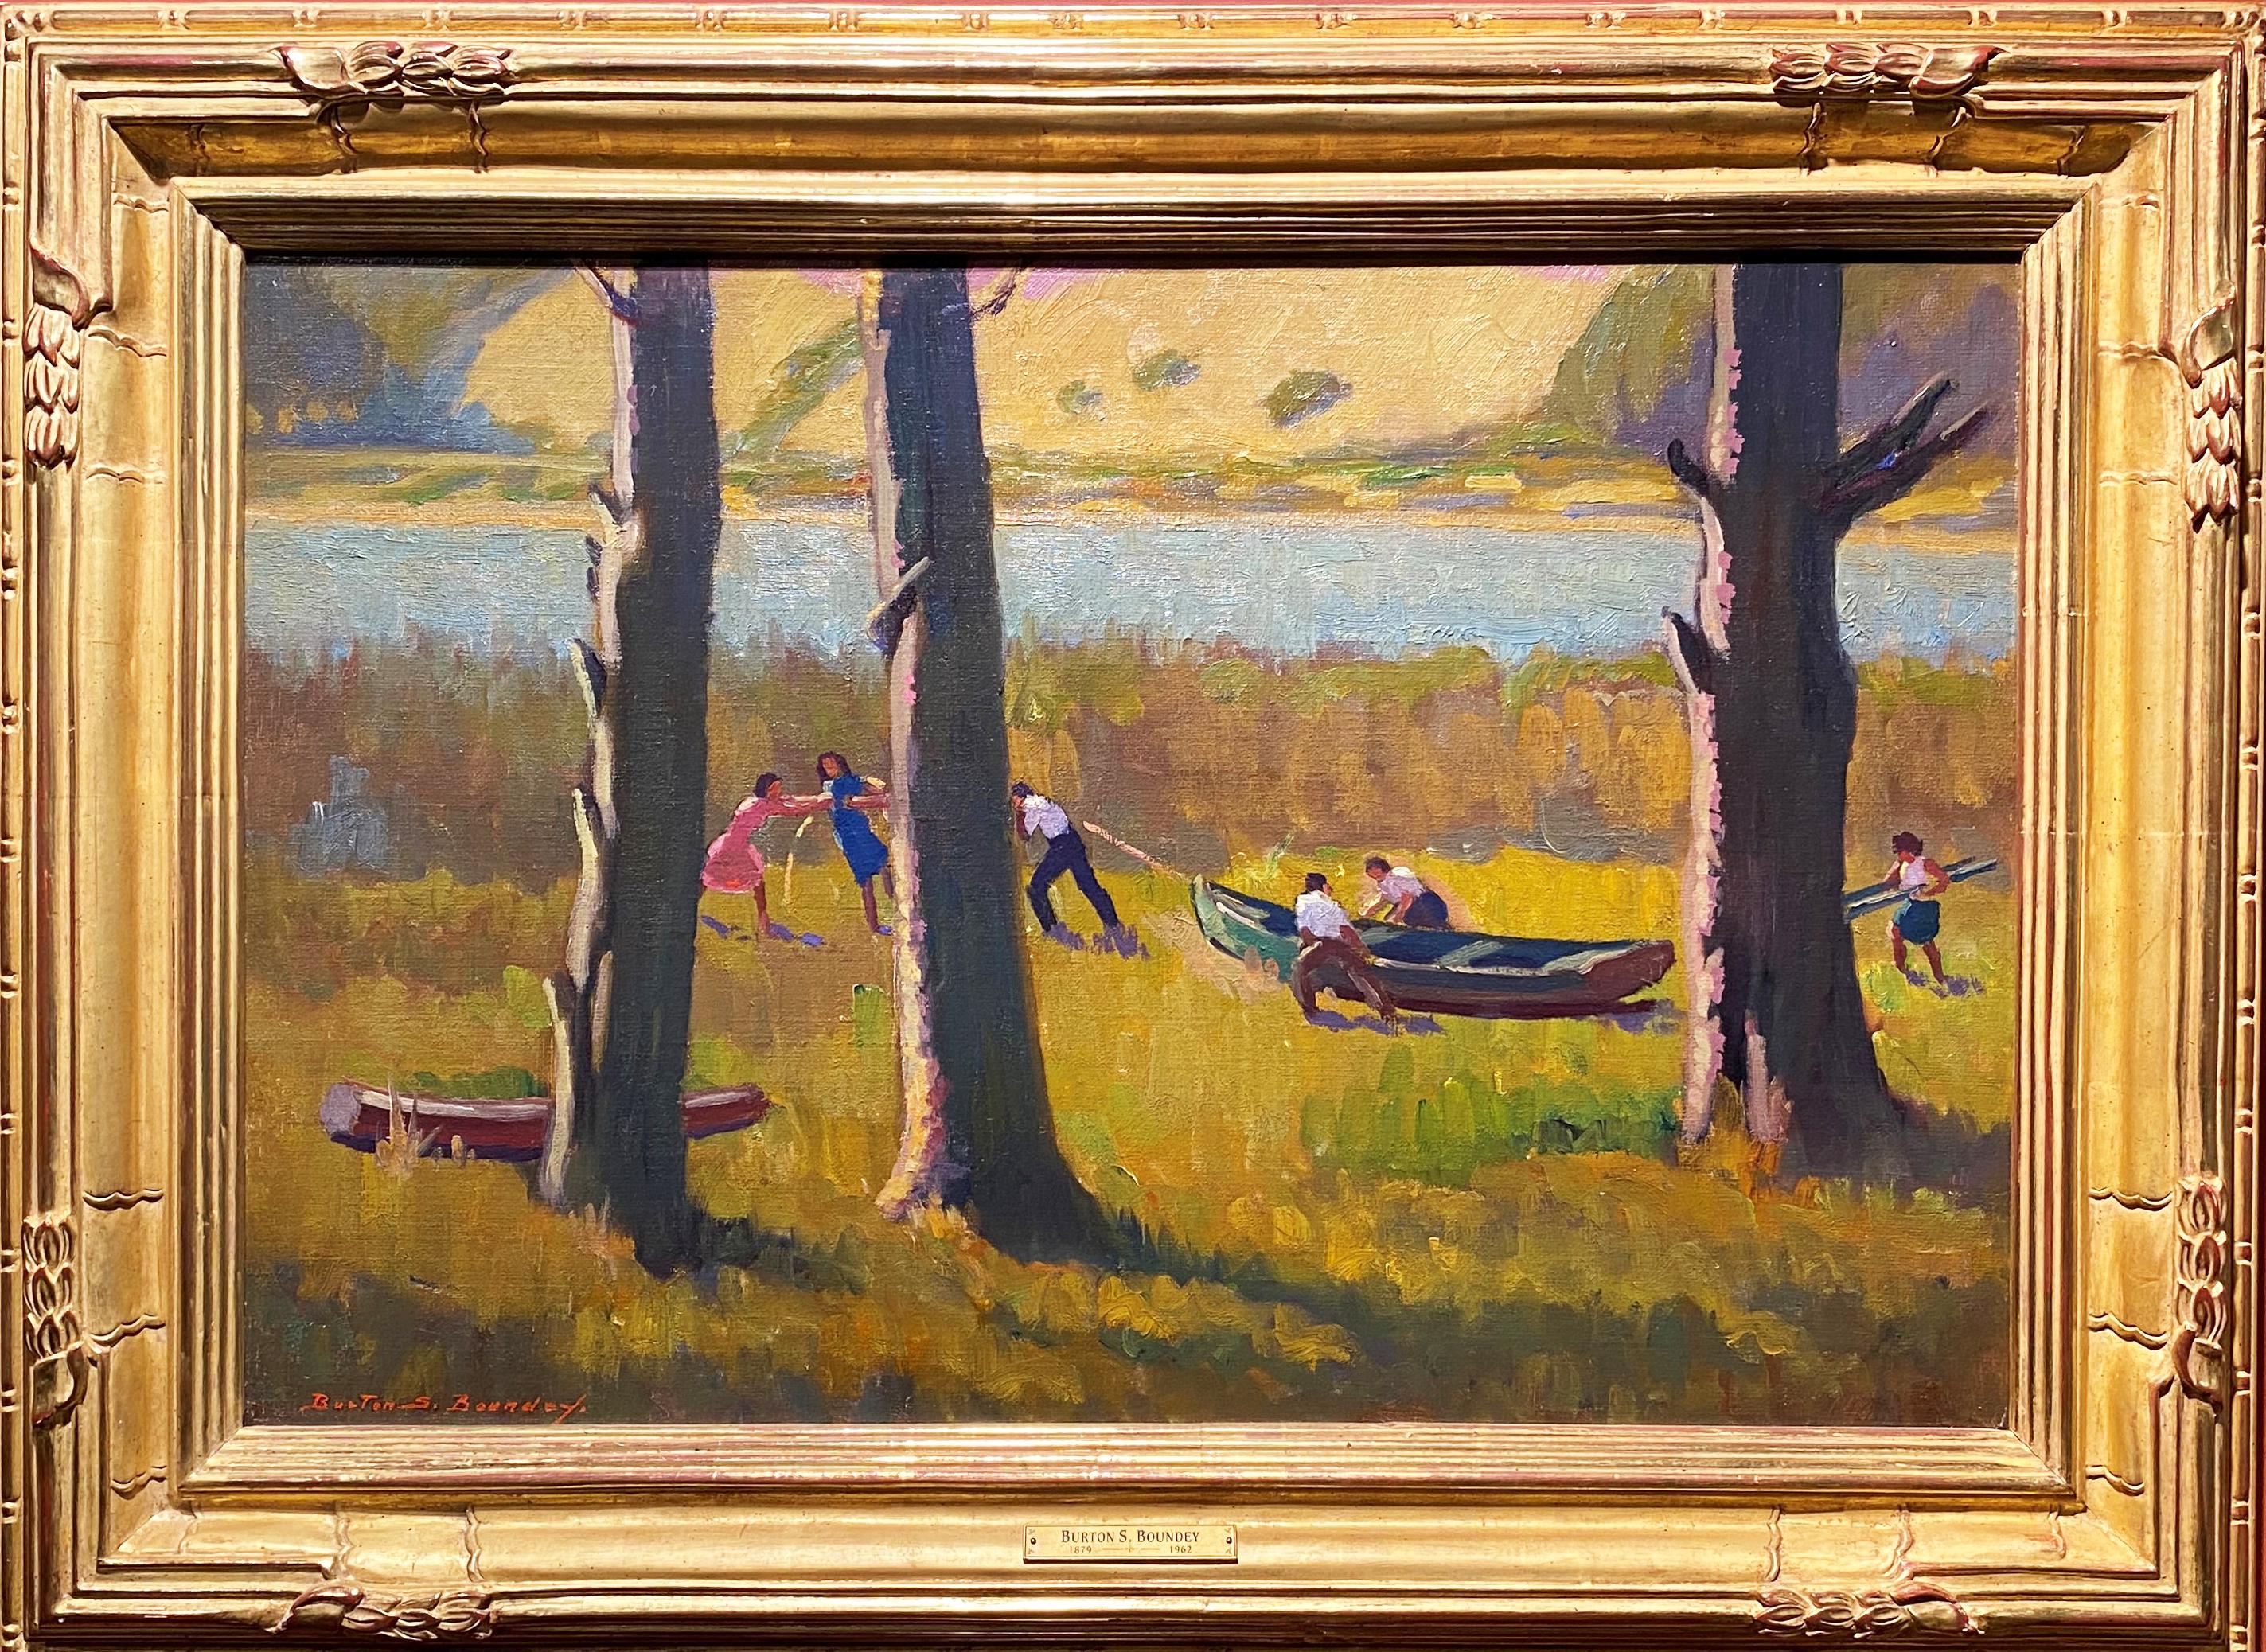 Burton S. Boundey Figurative Painting - Bringing Out The Boat